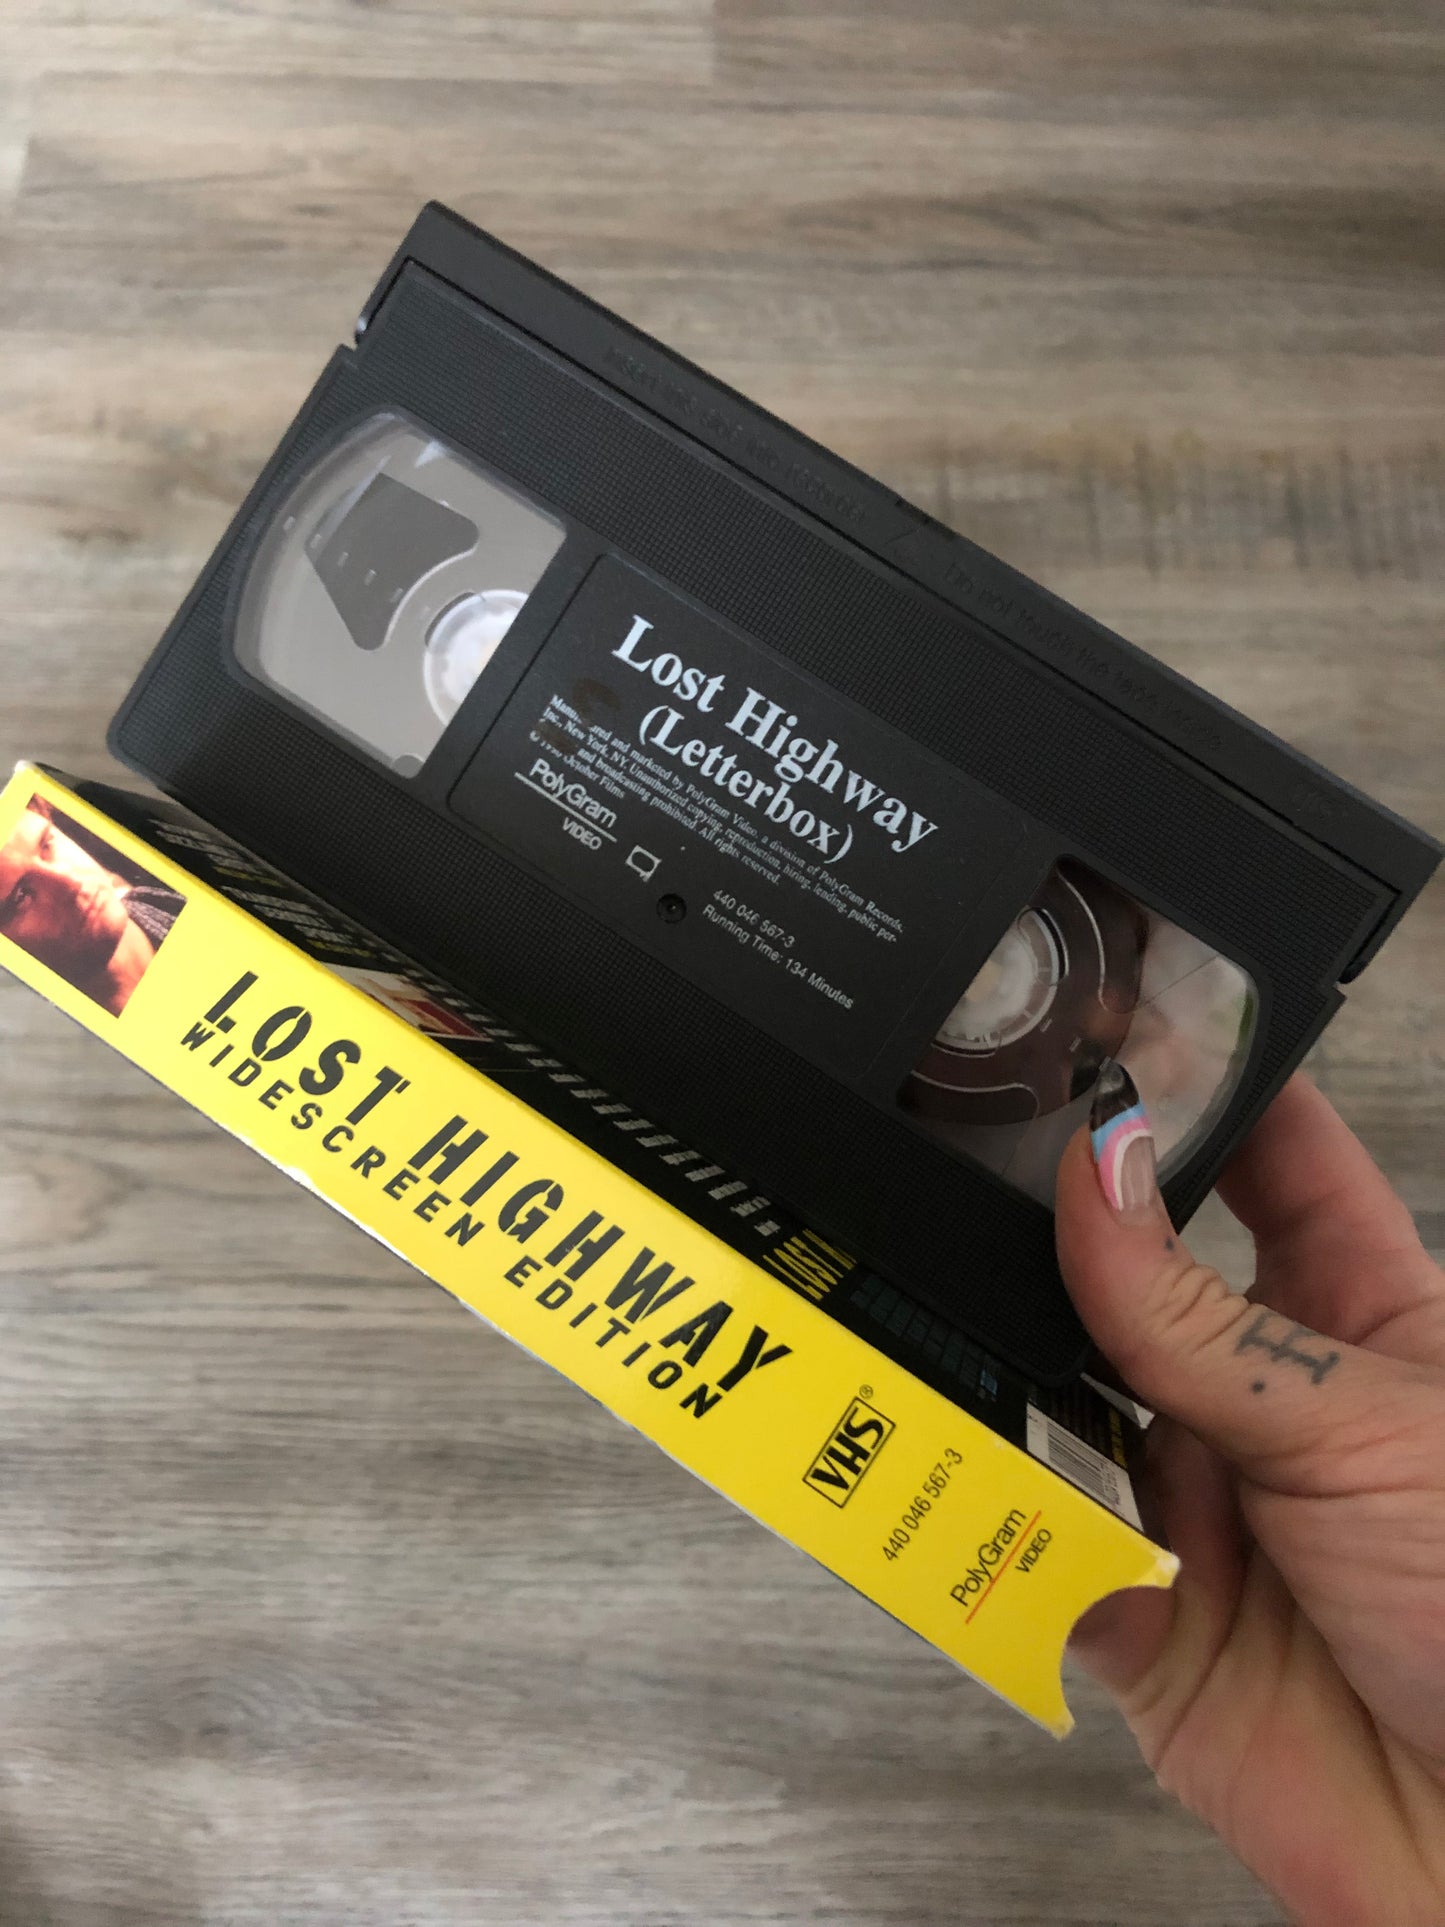 Lost Highway VHS